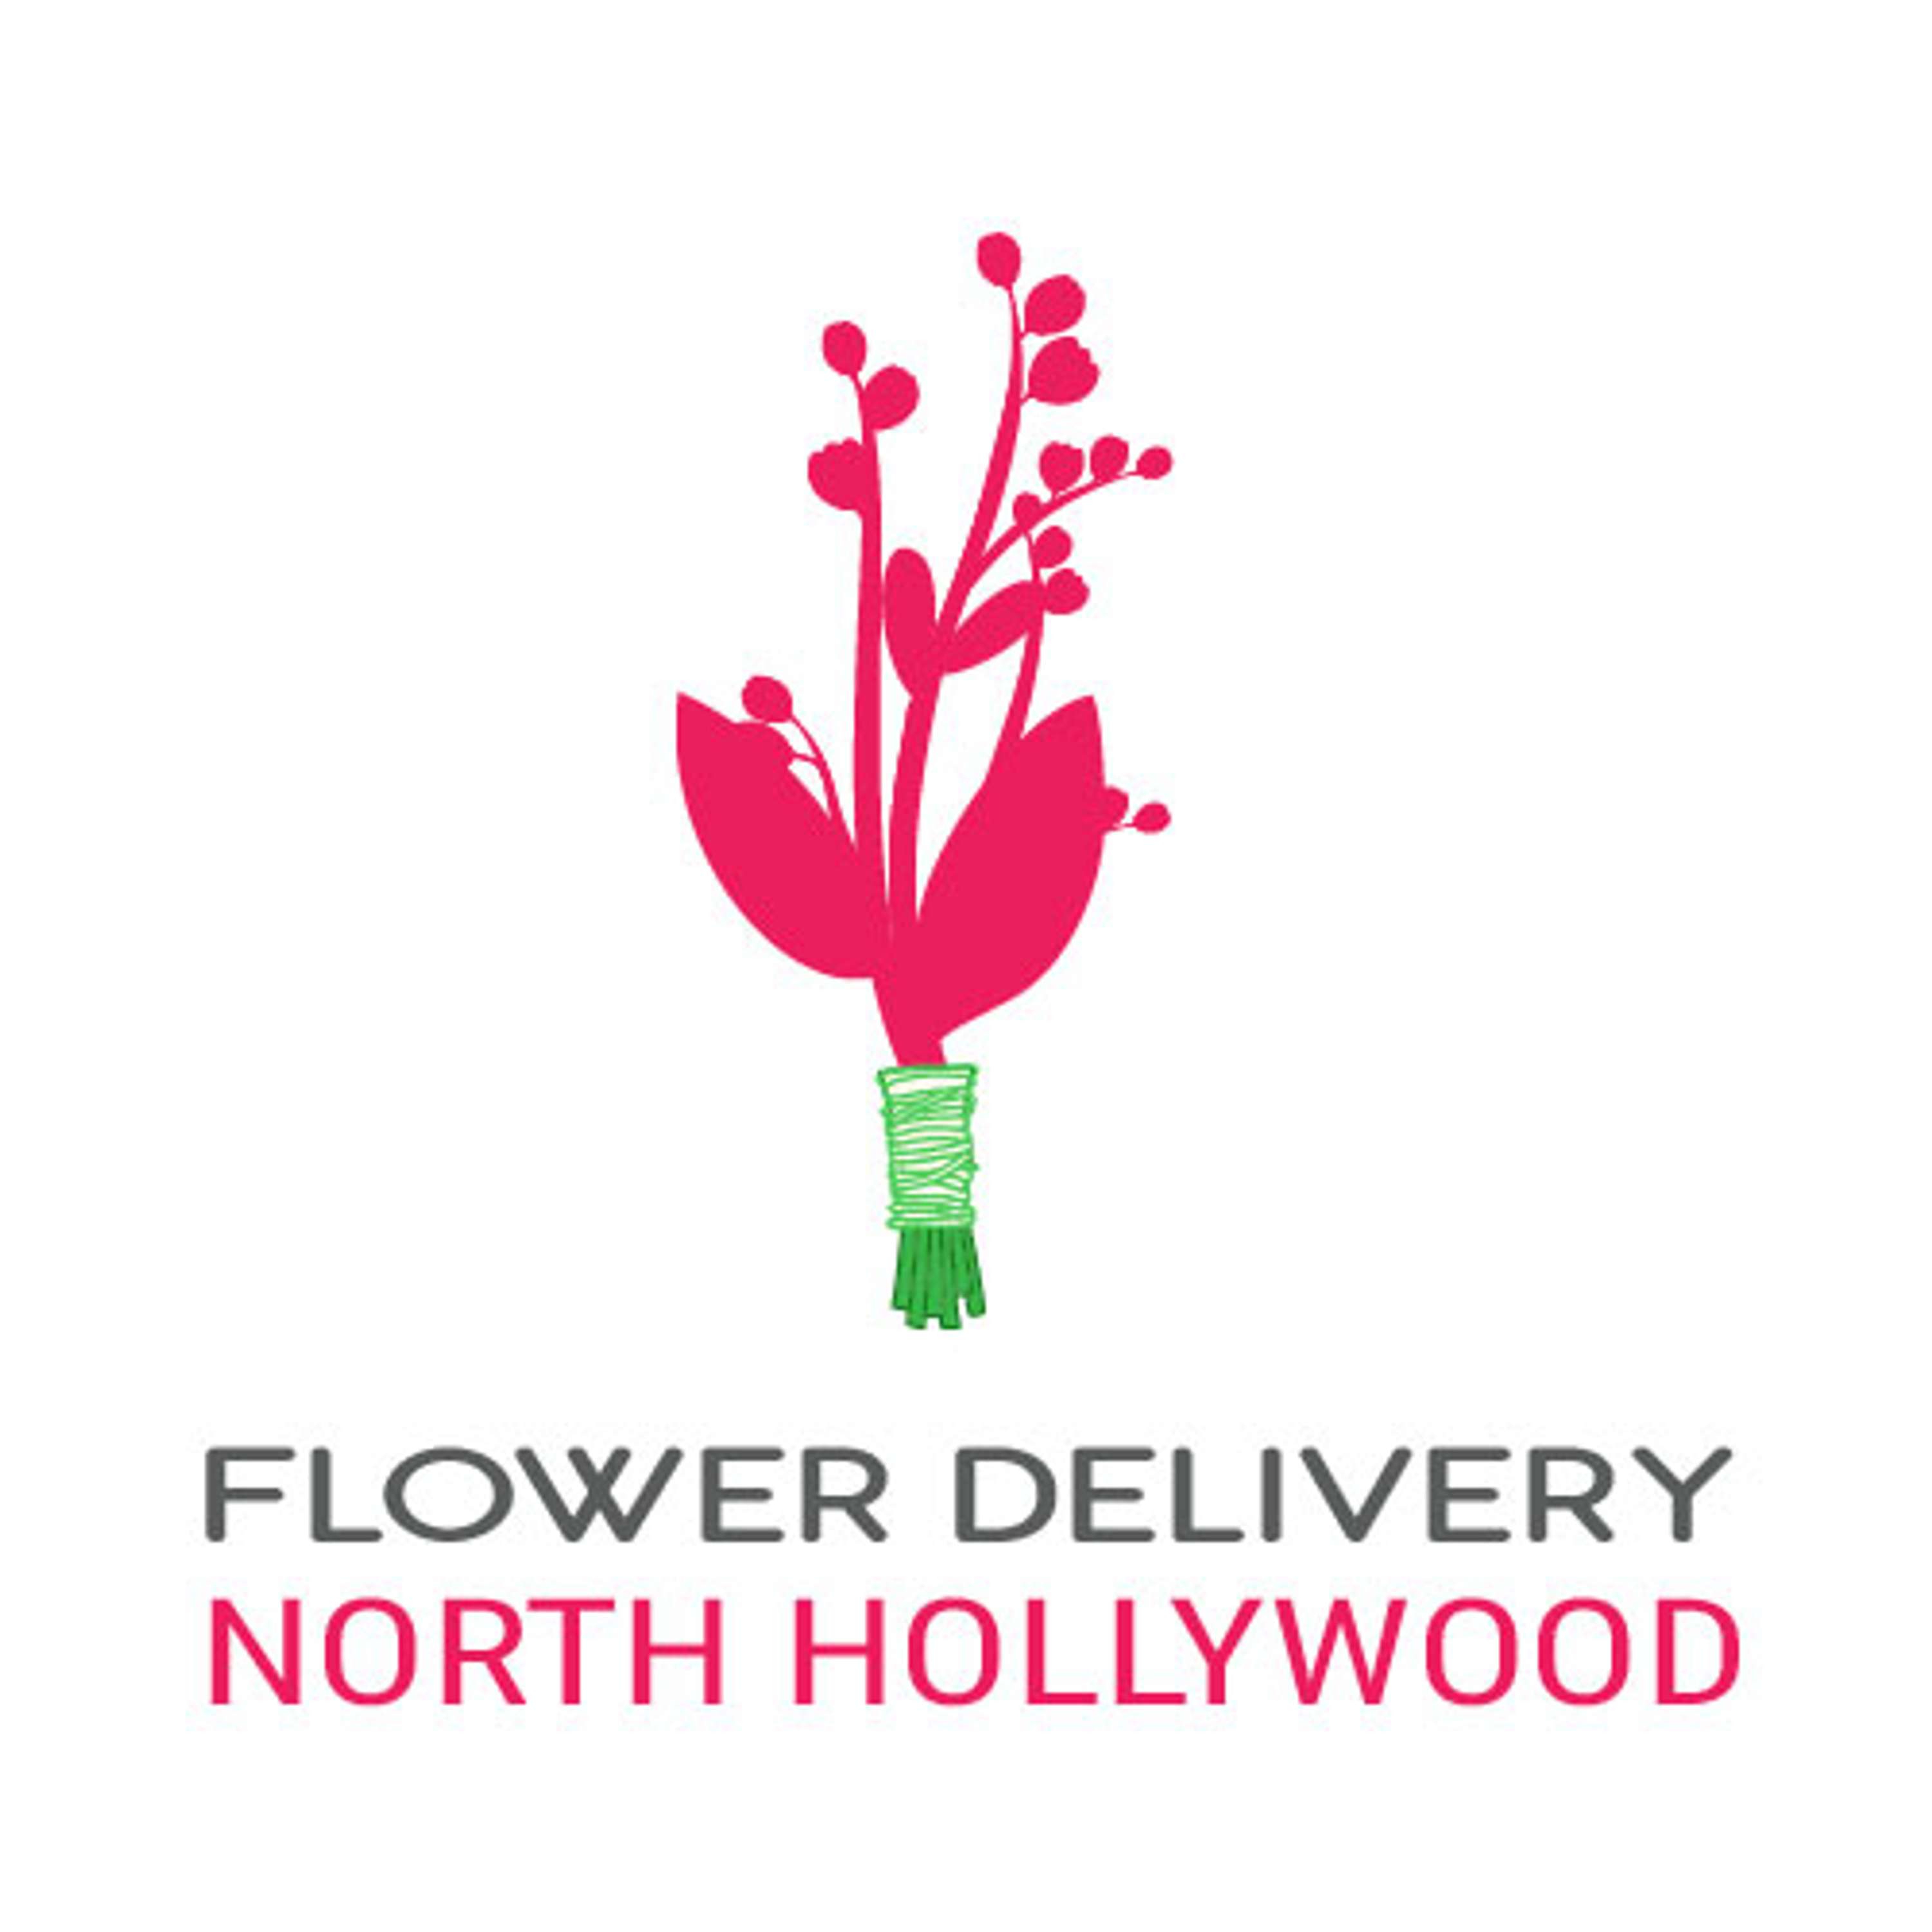 Flower Delivery Logo - Flower Delivery North Hollywood | The Dots